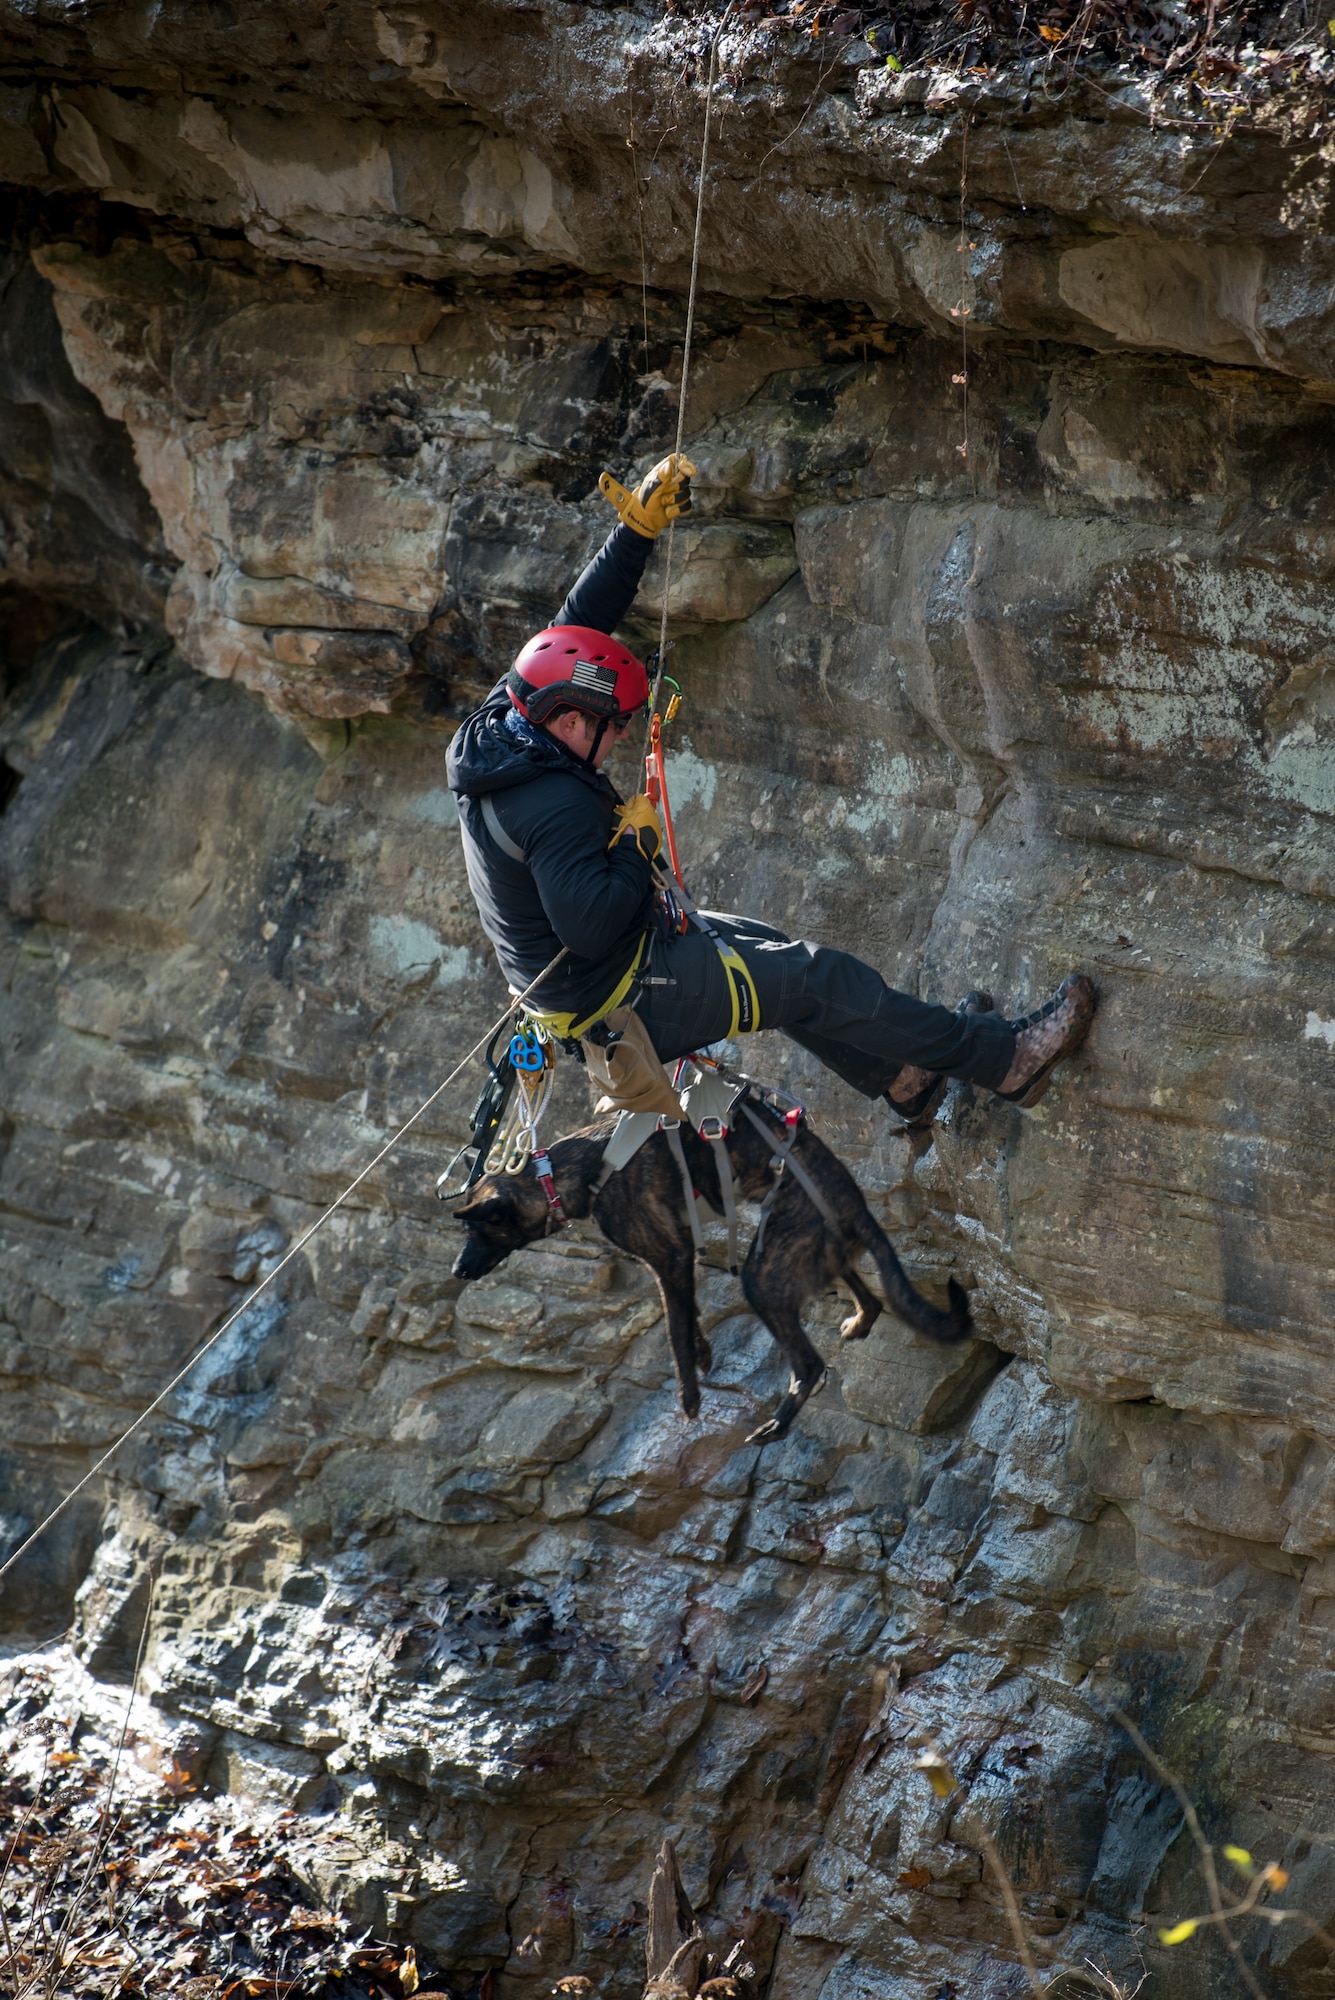 Tech. Sgt. Rudy Parsons, a pararescueman with the Kentucky Air National Guard’s 123rd Special Tactics Squadron, and his search and rescue dog, Callie, rappel down a cliff in Louisville, Ky., Dec. 7, 2108, as part of Callie’s familiarization training. Callie is currently the only search and rescue dog in the Department of Defense. (U.S. Air National Guard photo by Staff Sgt. Joshua Horton)